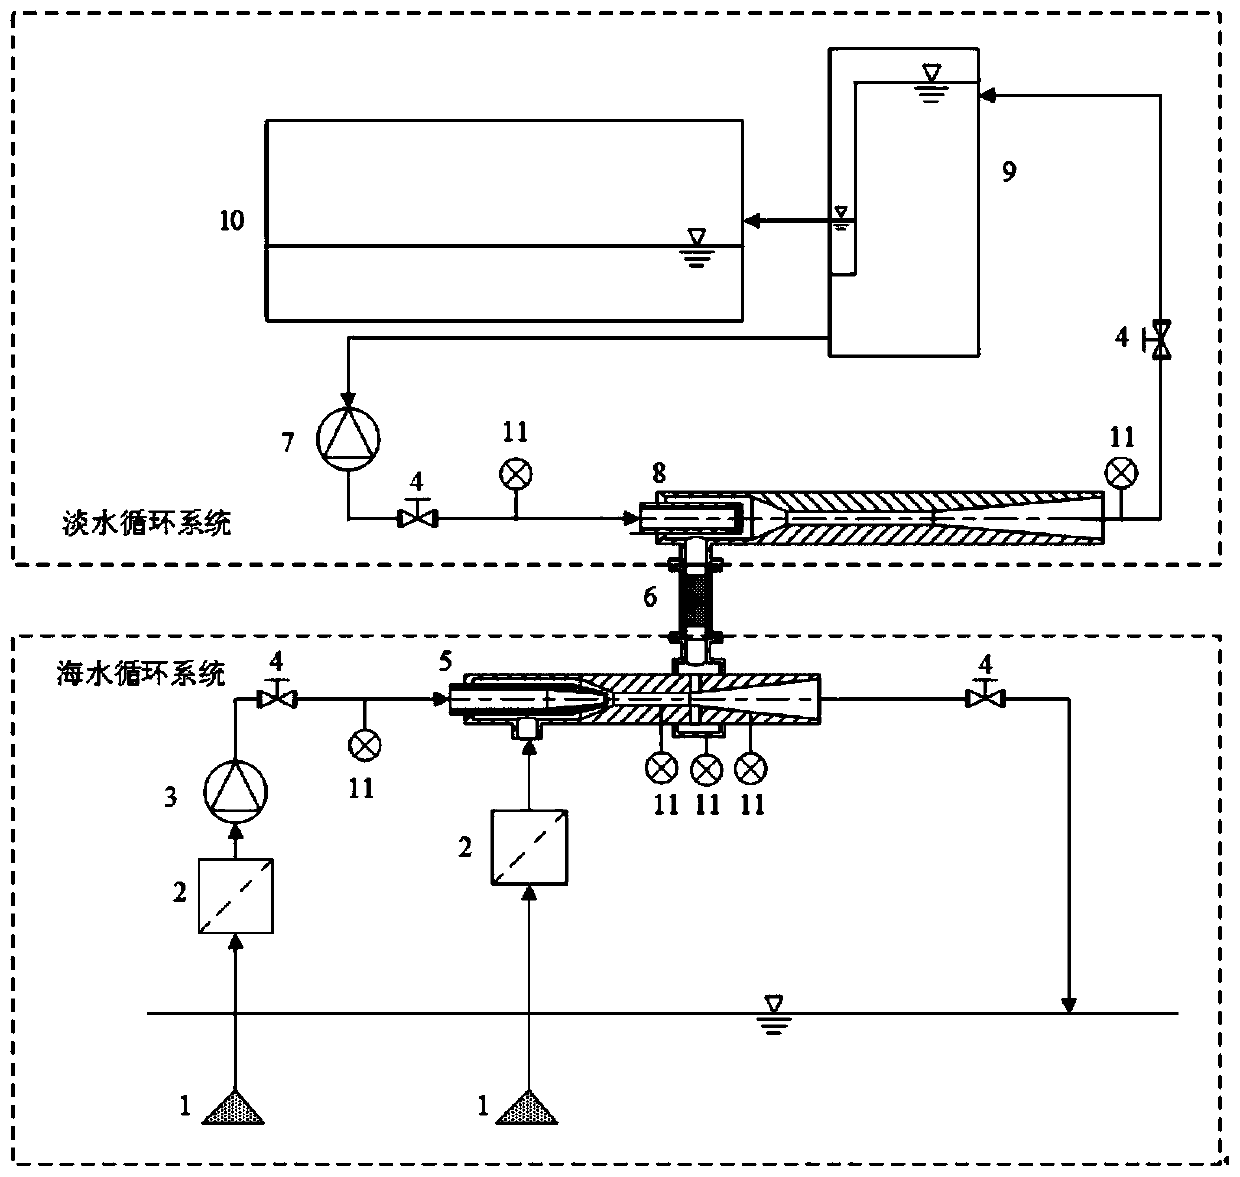 Normal temperature low-pressure seawater desalination system based on ejection cavitation technology